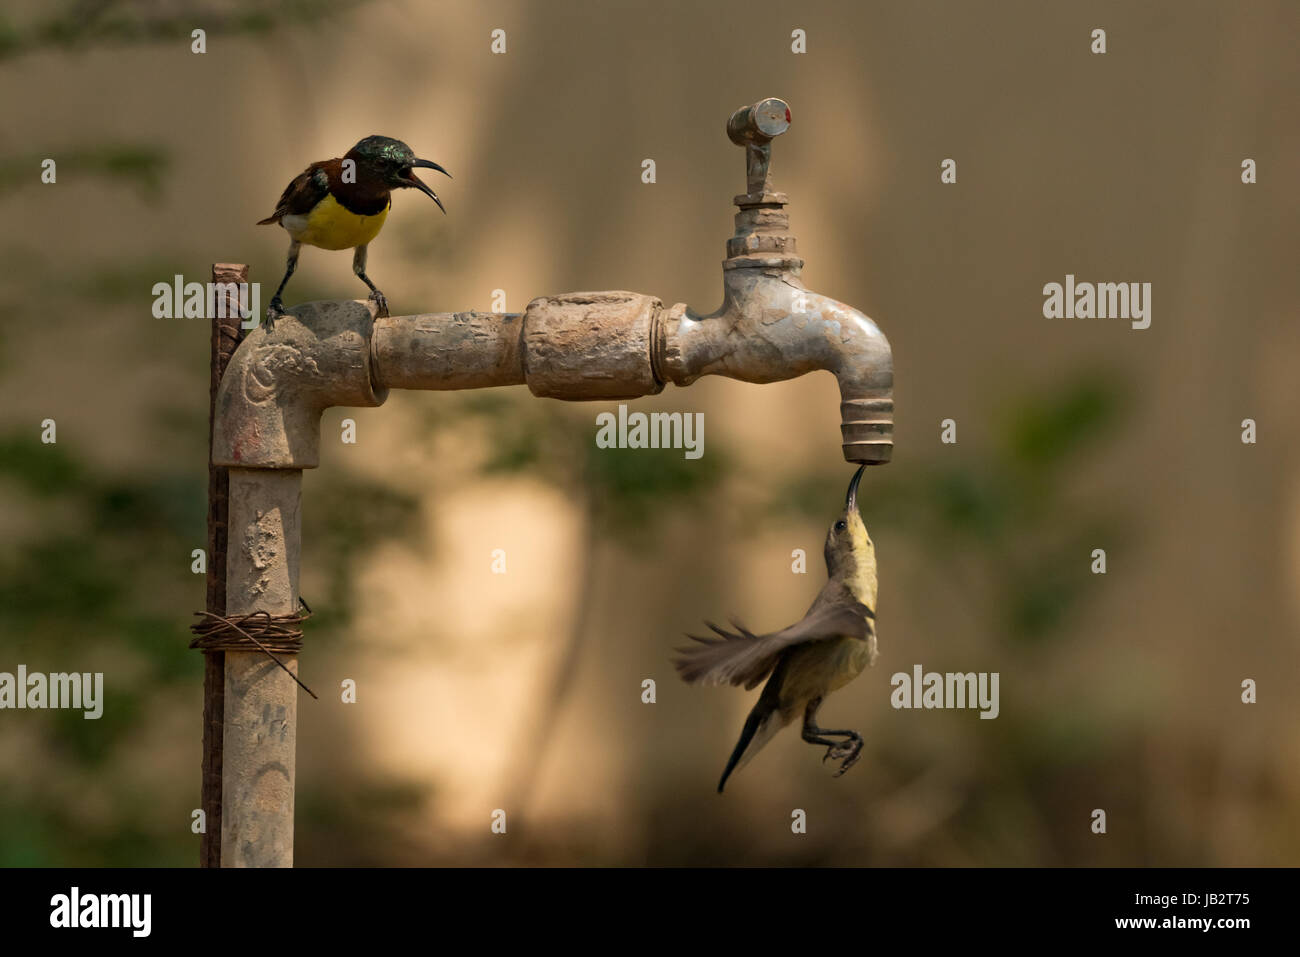 Sunbird watches another drink from outdoor tap Stock Photo